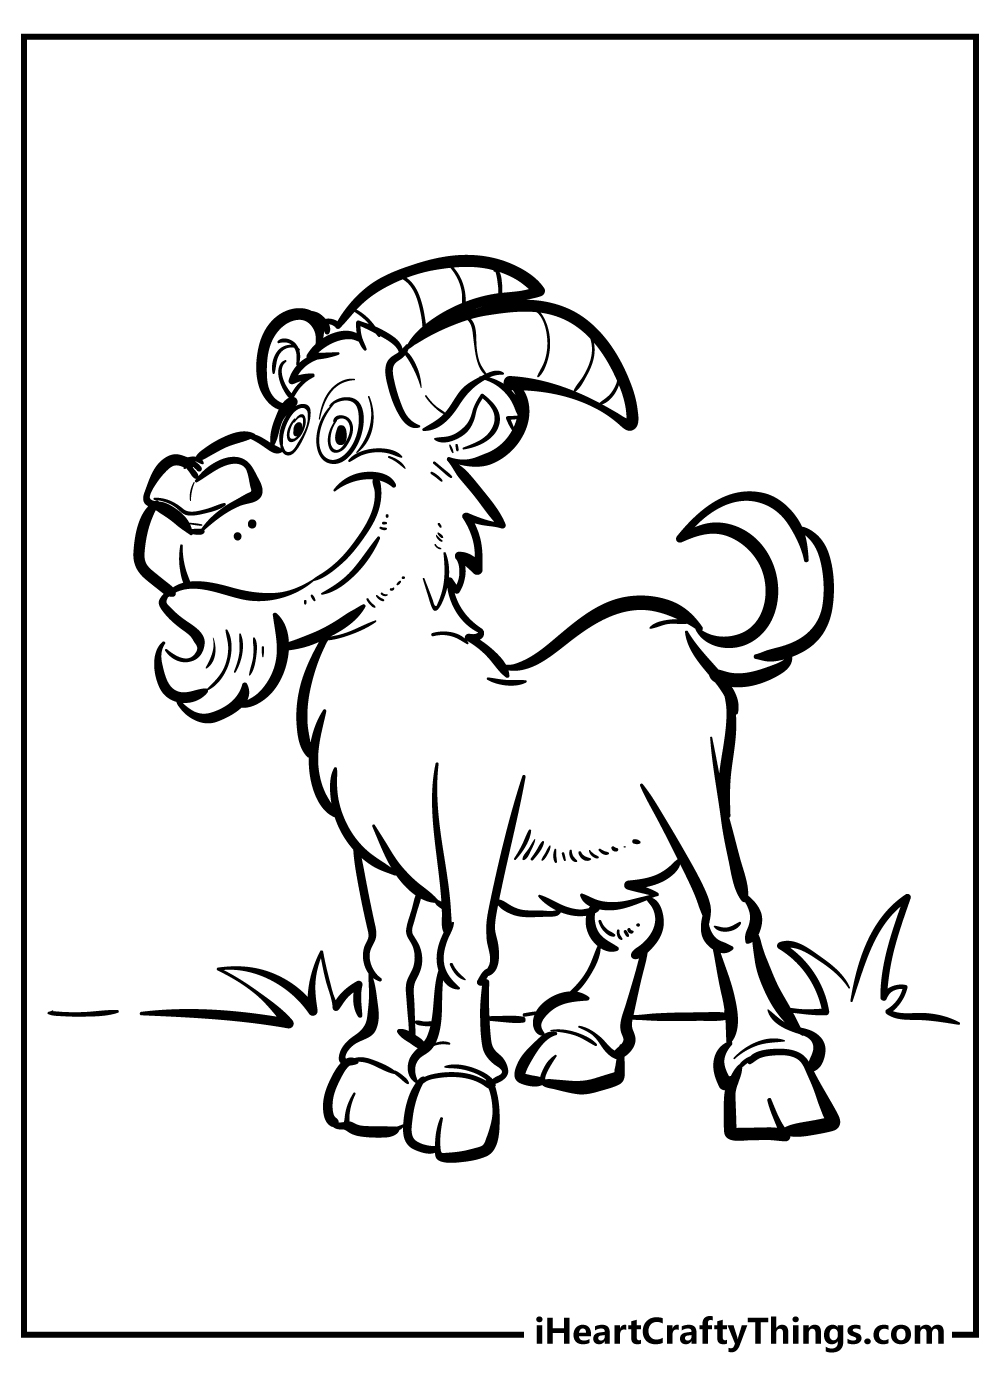 Goat Coloring Pages for kids free download